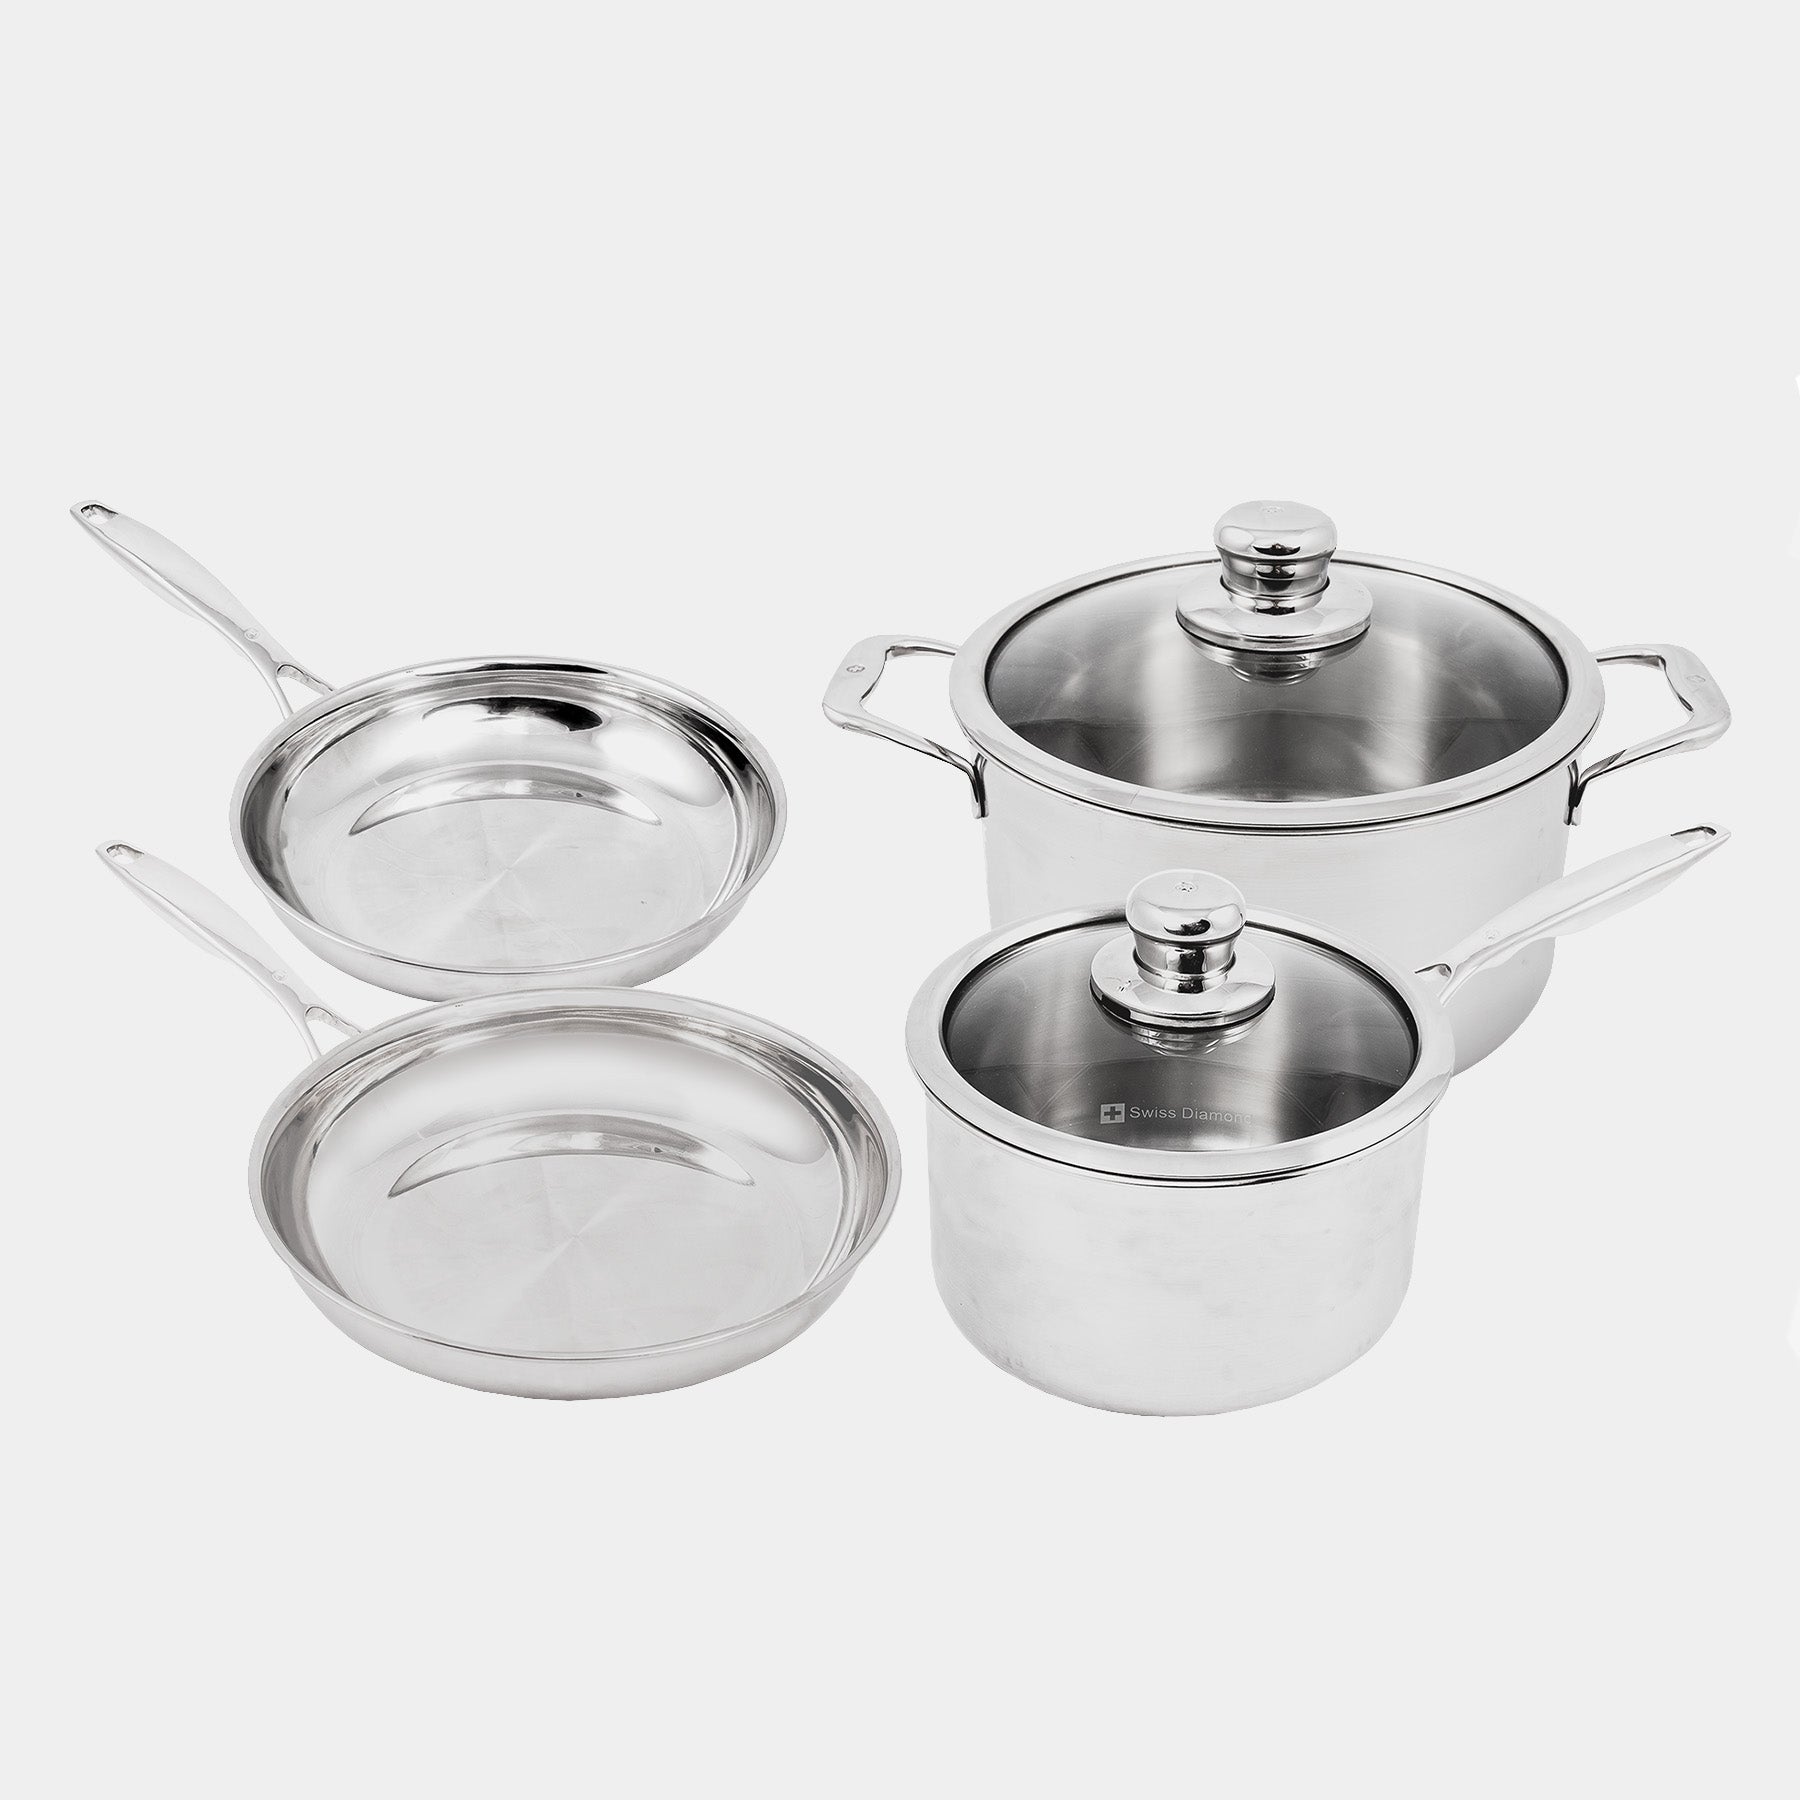 Premium Clad 6-Piece Stainless Steel Set. Includes: Fry Pans + Saucepan with Lid + Dutch Oven with Lid.